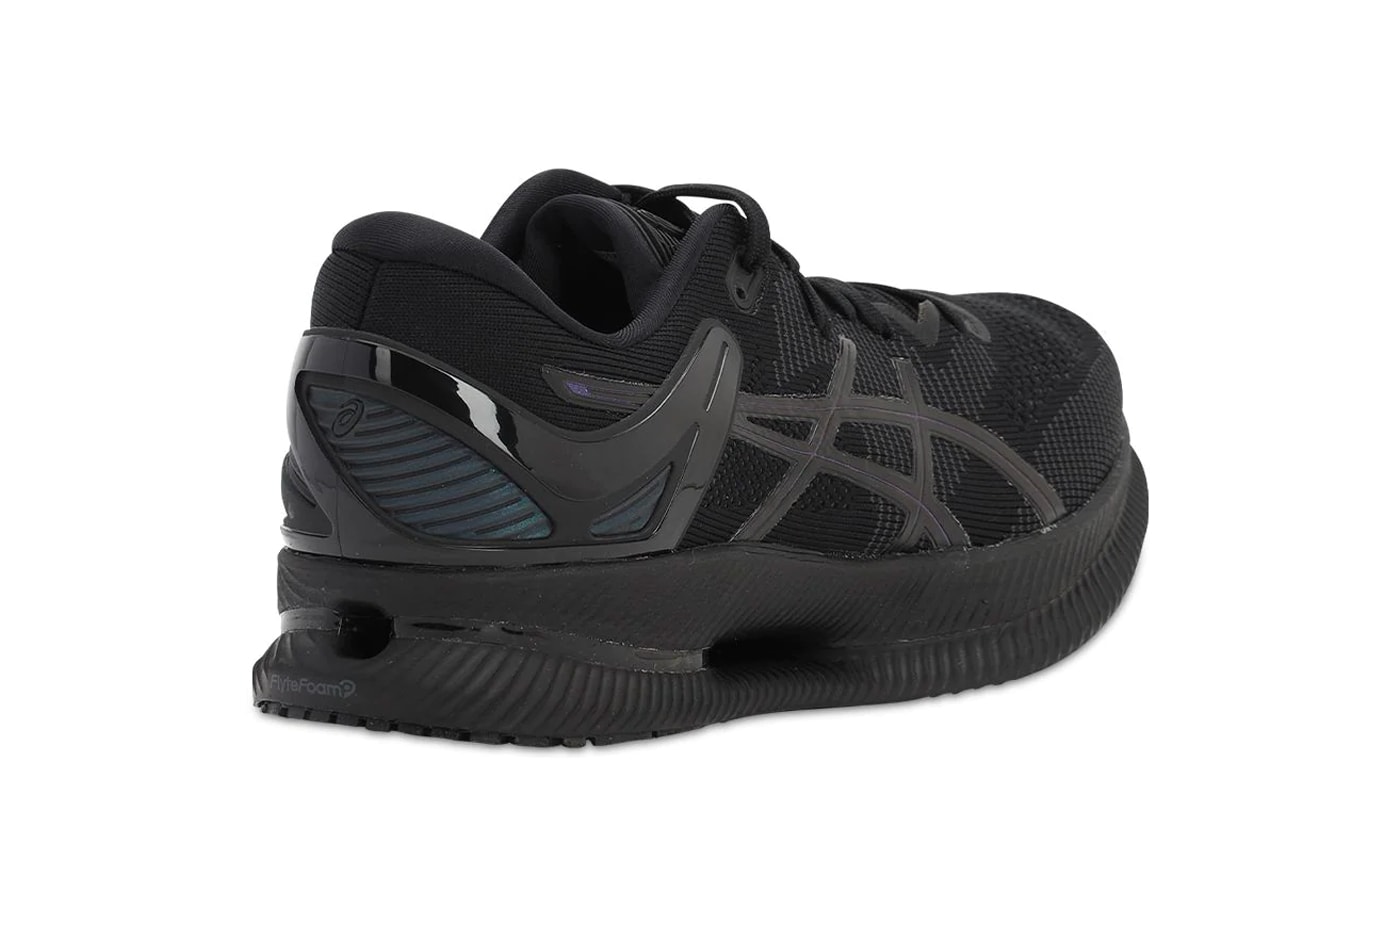 ASICS Metaride Sneakers Triple Black 71I WL9022 menswear streetwear trainers runners shoes spring summer 2020 collection kicks knit breathable Rubber air chamber lifestyle